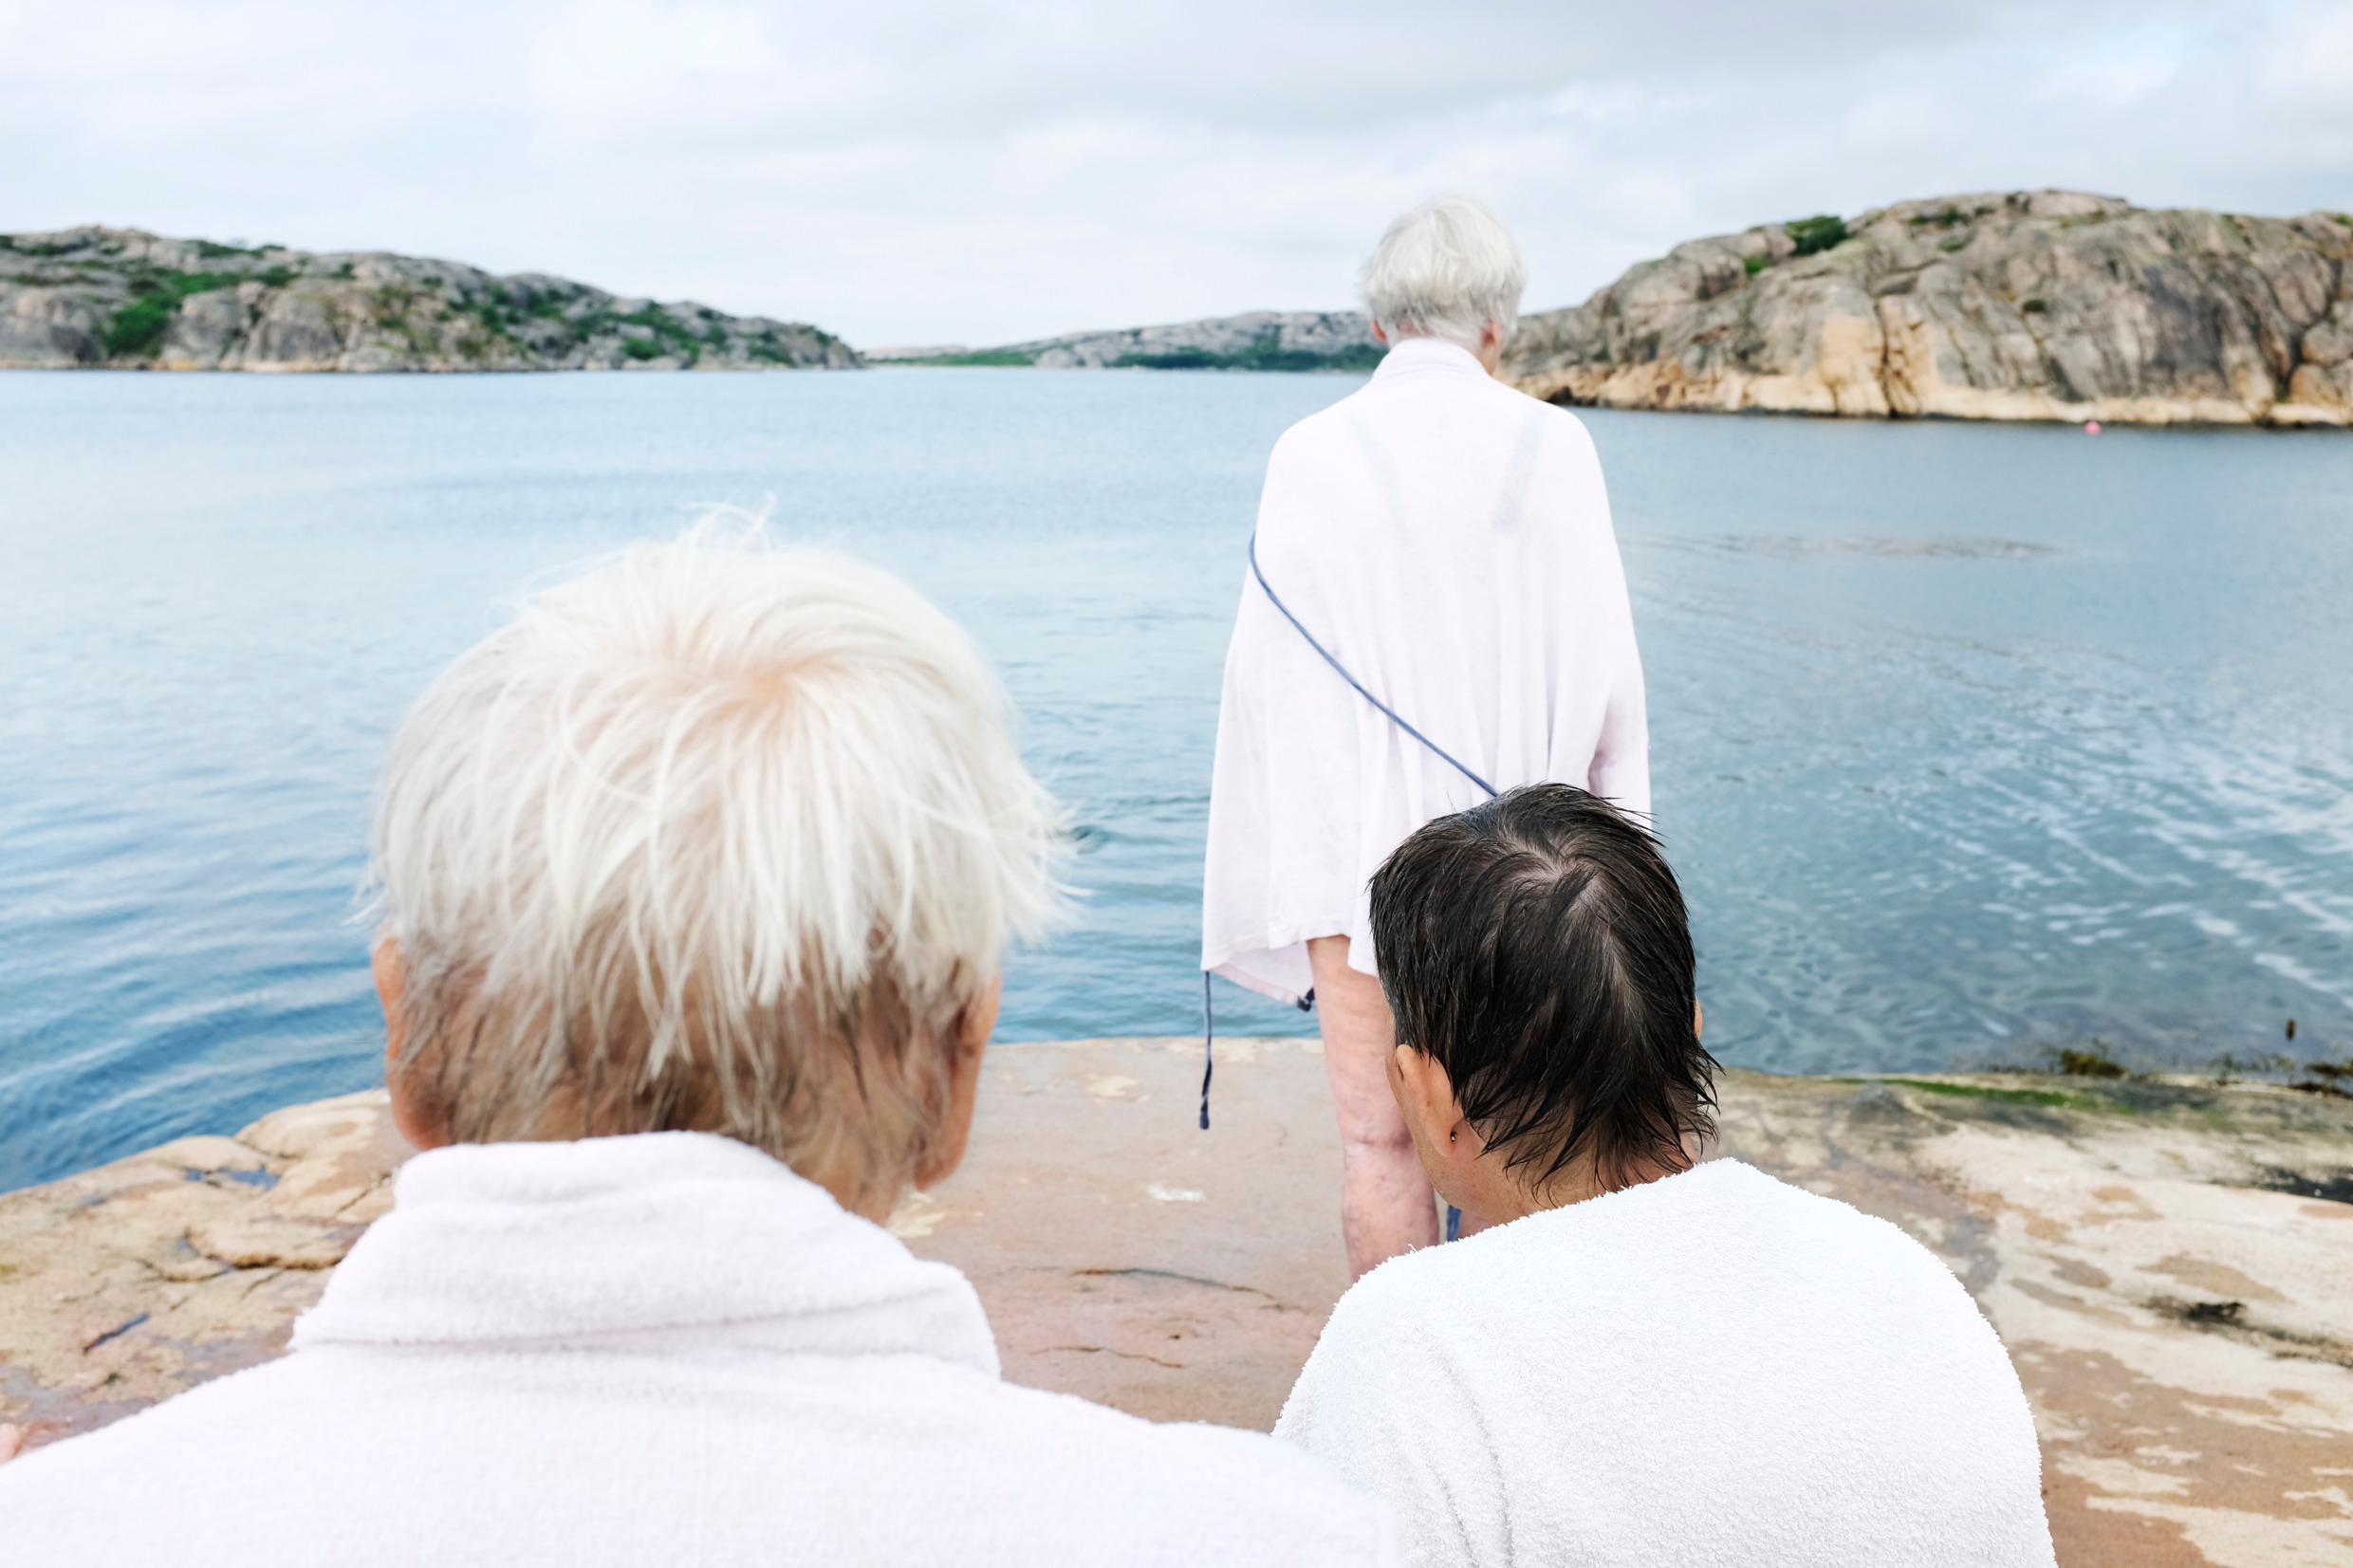 Three elderly women by the sea, all seen from the back and wearing bath robes.